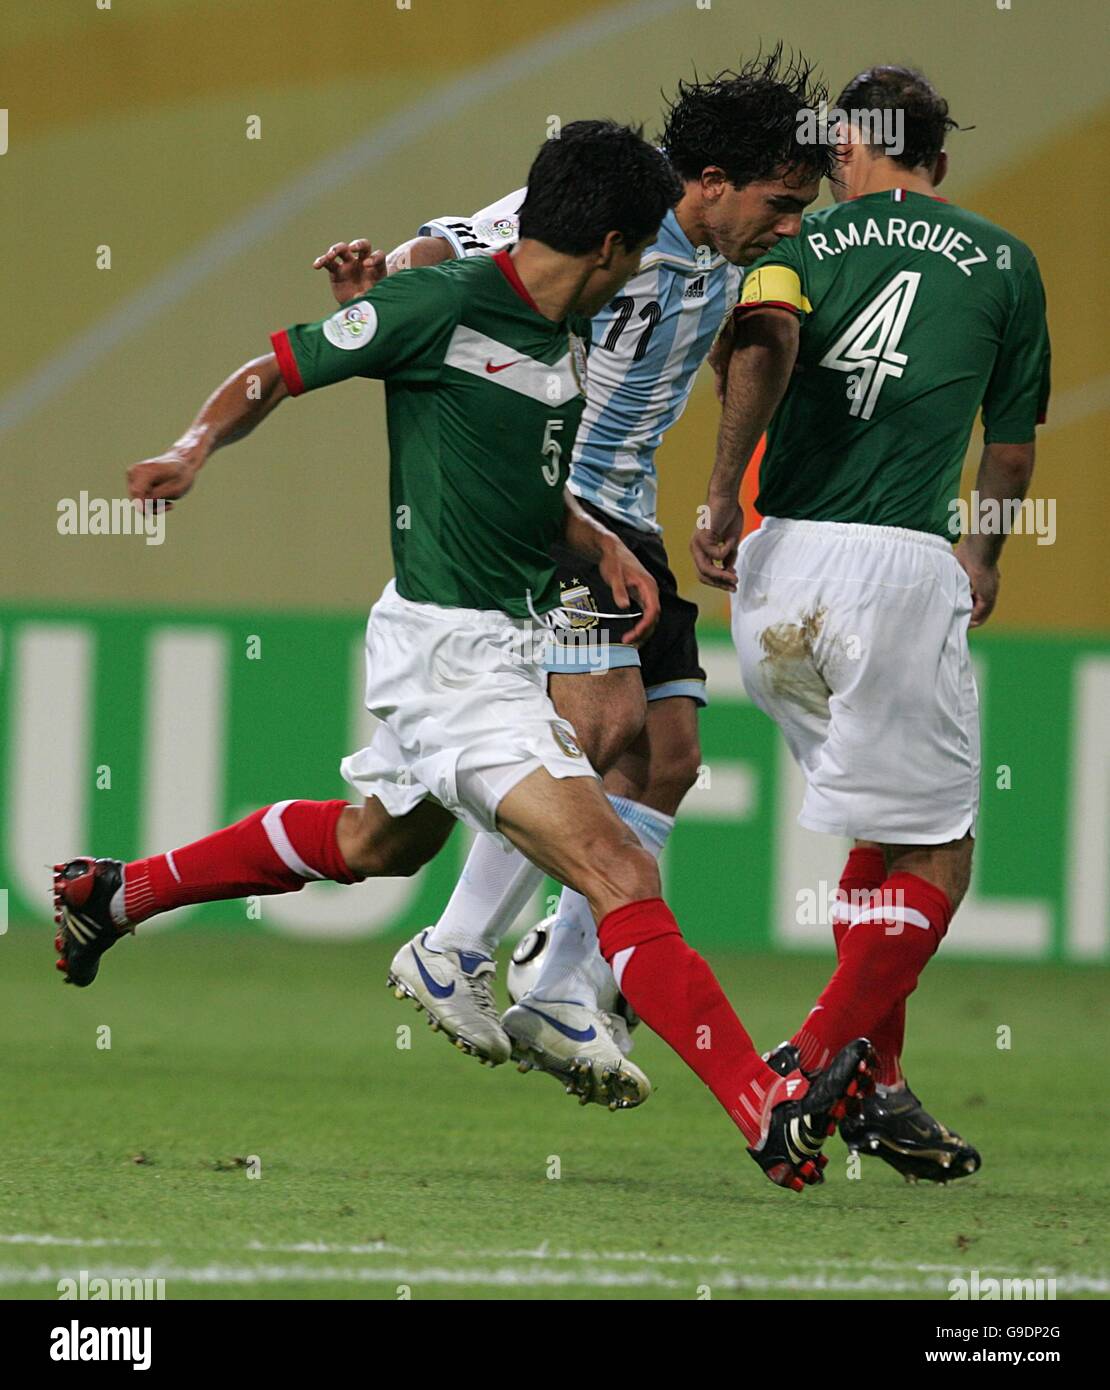 Soccer - 2006 FIFA World Cup Germany - Second Round - Argentina v Mexico - Zentralstadion. Argentina's Carlos Tevez is challenged by Mexico's Rafael Marquez and Ricardo Osorio Stock Photo